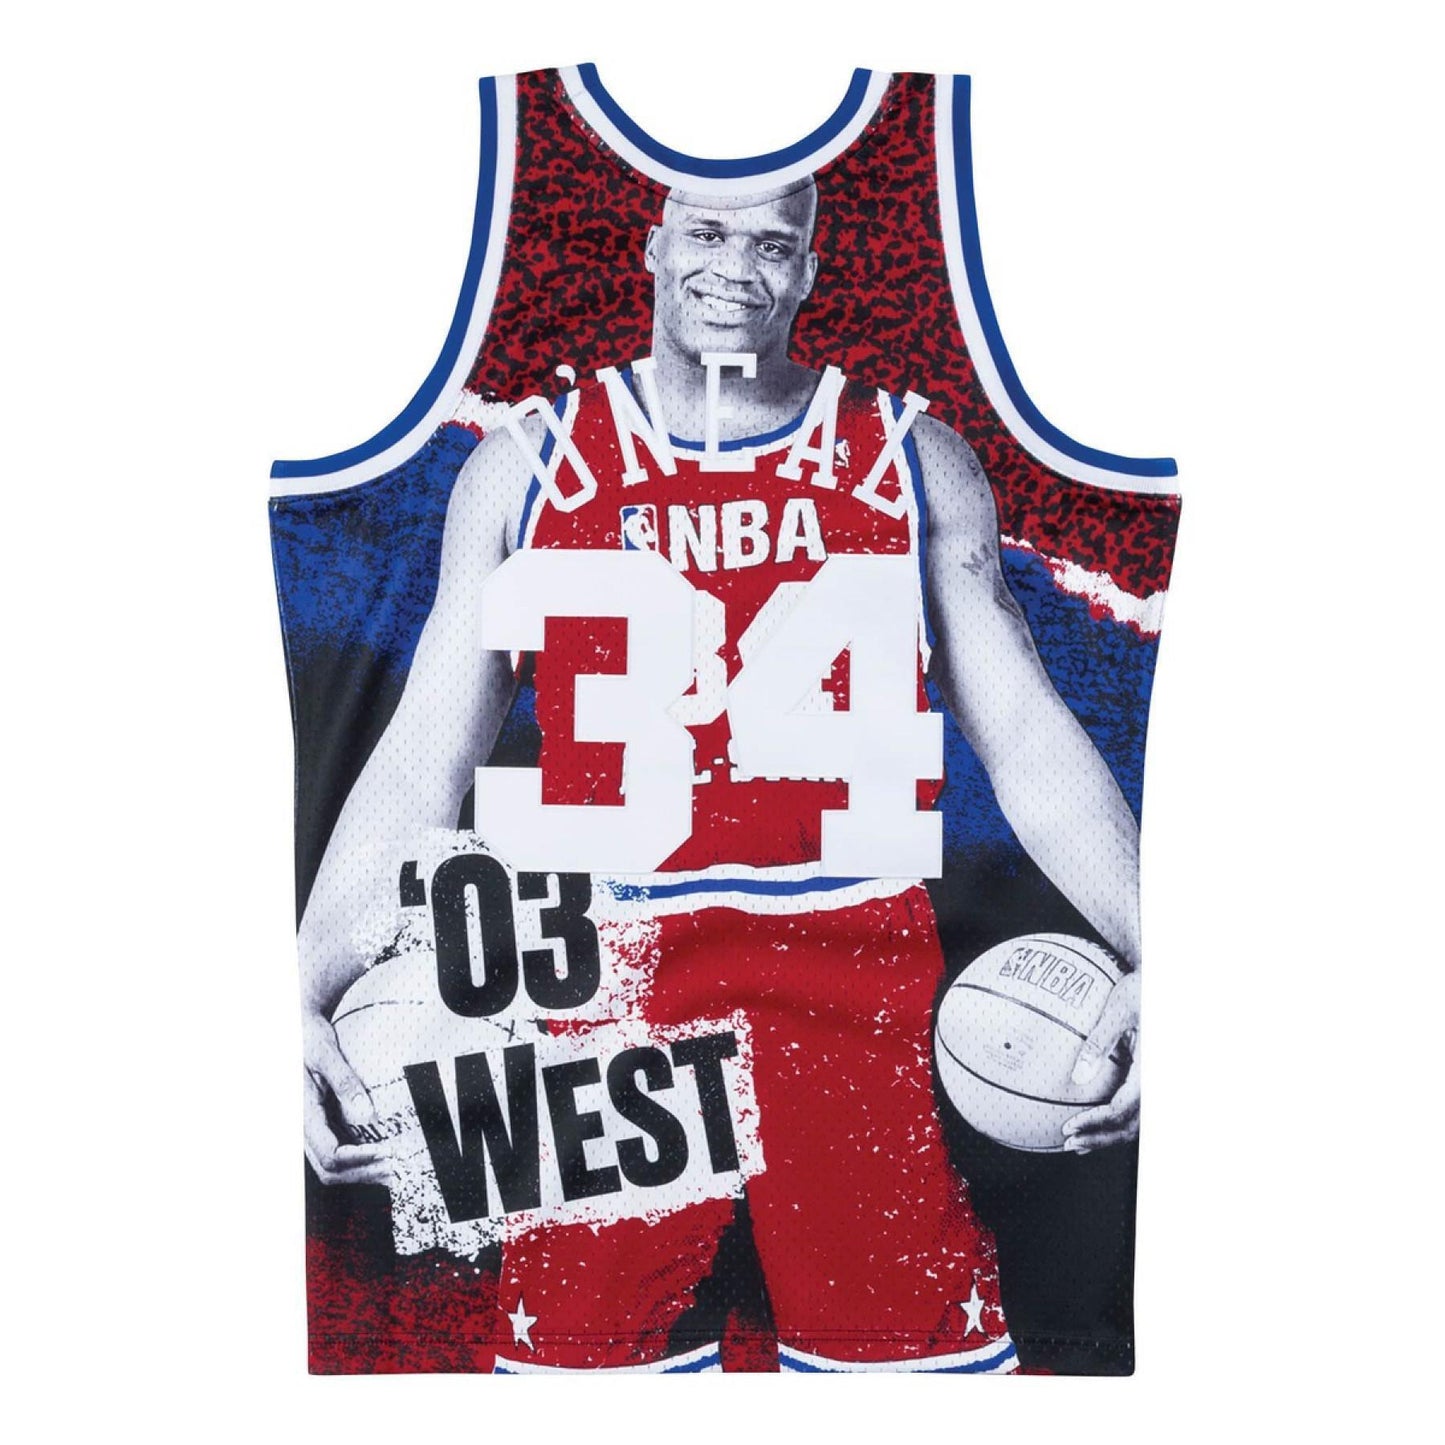 NBA Sublimated Swingman Jersey All Star West 2003 Shaquille O'neal